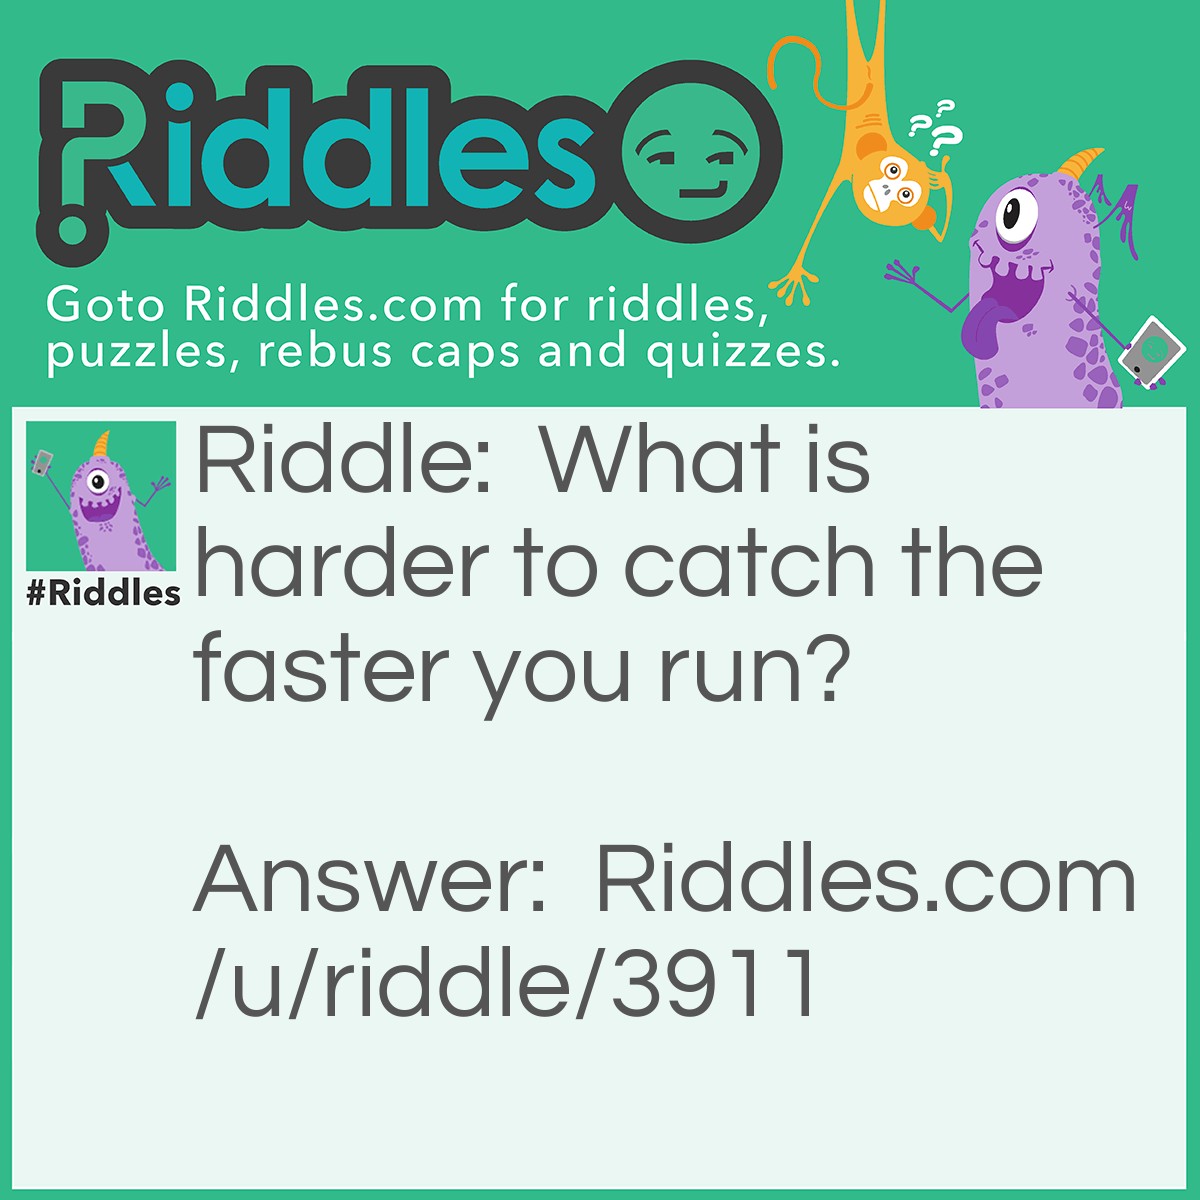 Riddle: What is harder to catch the faster you run? Answer: Your breath.